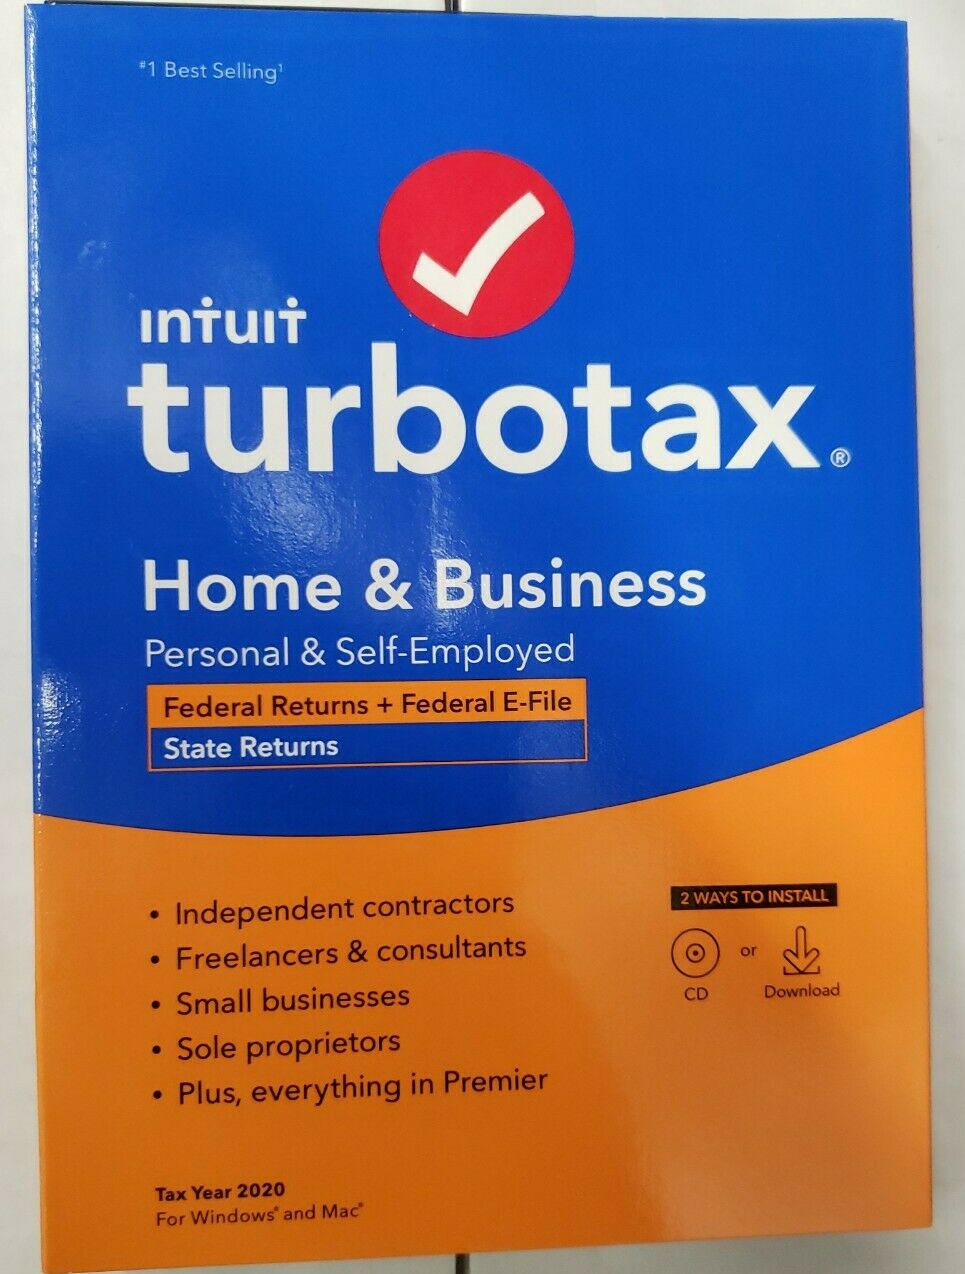 Intuit Turbotax 2020 Home & Business- Federal E-file,state Code Only Read